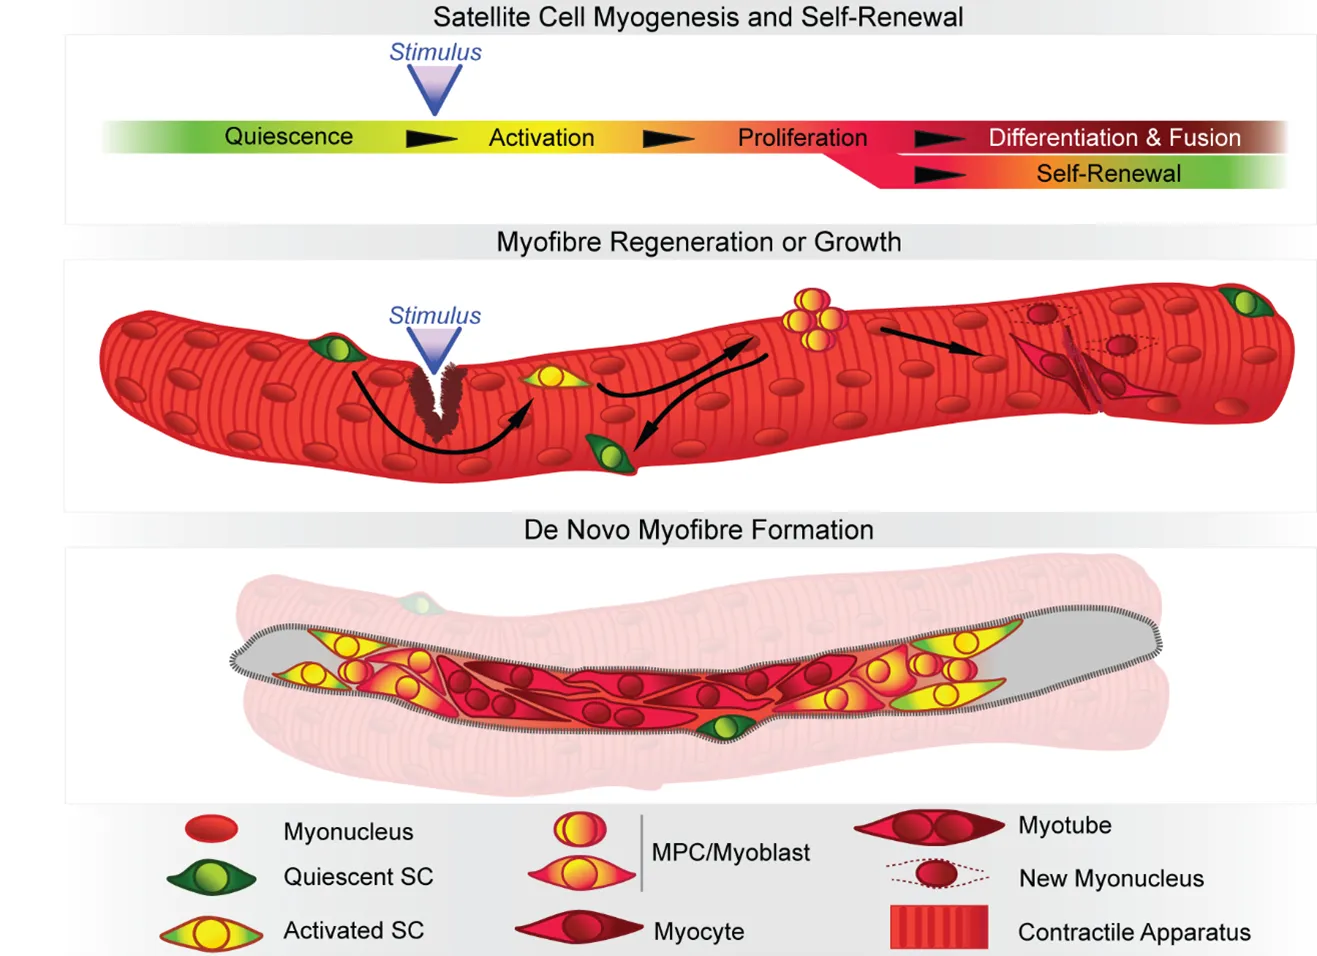 Satellite cells (SC) normally lay quiescent (green) on adult myofibres. In response to growth cues, trauma or injury (stimulus; blue arrowhead), satellite cells activate (yellow) and  proliferate  generating  a  population  of  muscle  progenitor cells  (MPCs) called myoblasts (orange). While the majority of myoblasts differentiate to become myocytes (red) and fuse either to pre-existing muscle fibres, or together to form new ones, a fraction of proliferating cells re-enters quiescence and reconstitute the stem cell pool, ensuring regenerative potential through life.